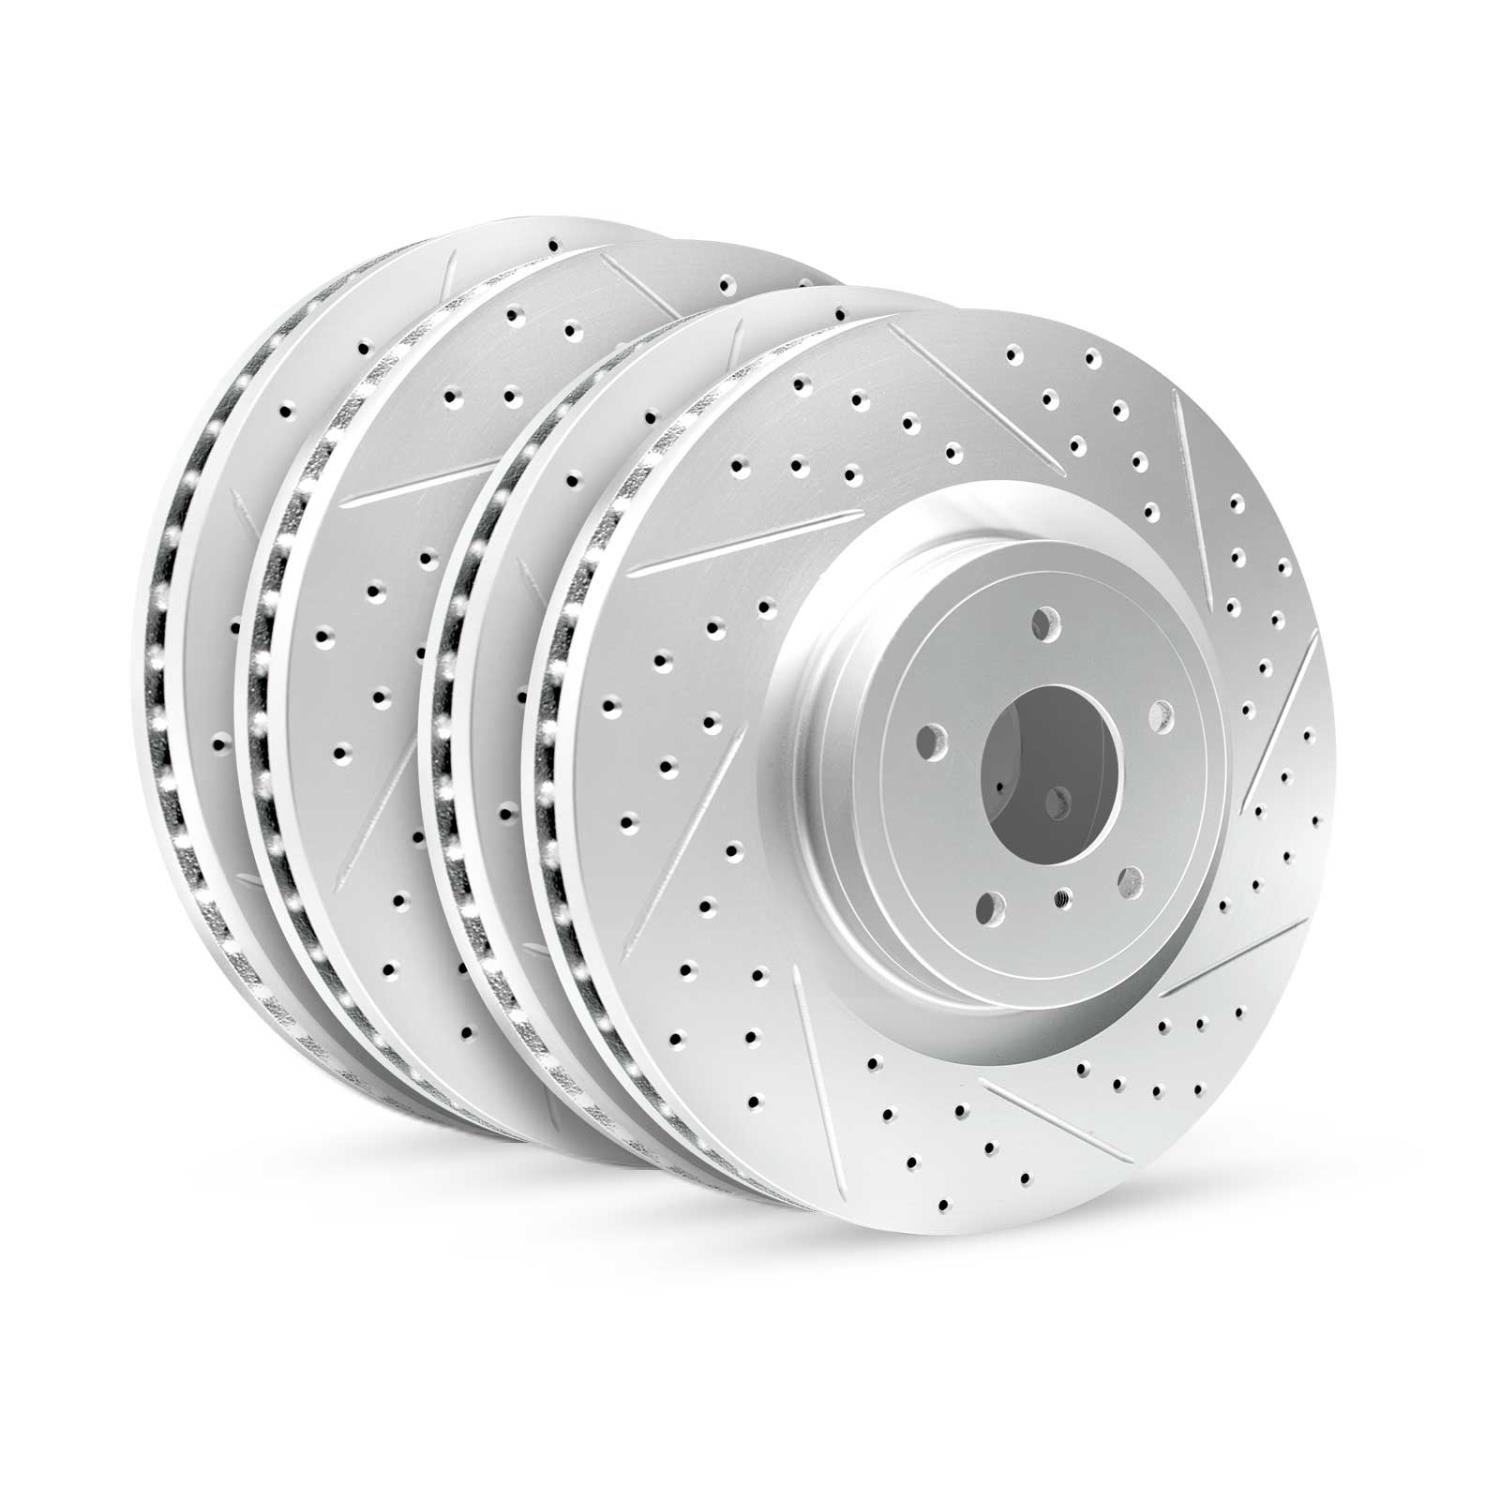 GEO-Carbon Drilled/Slotted Rotors, 2016-2019 Ford/Mazda,